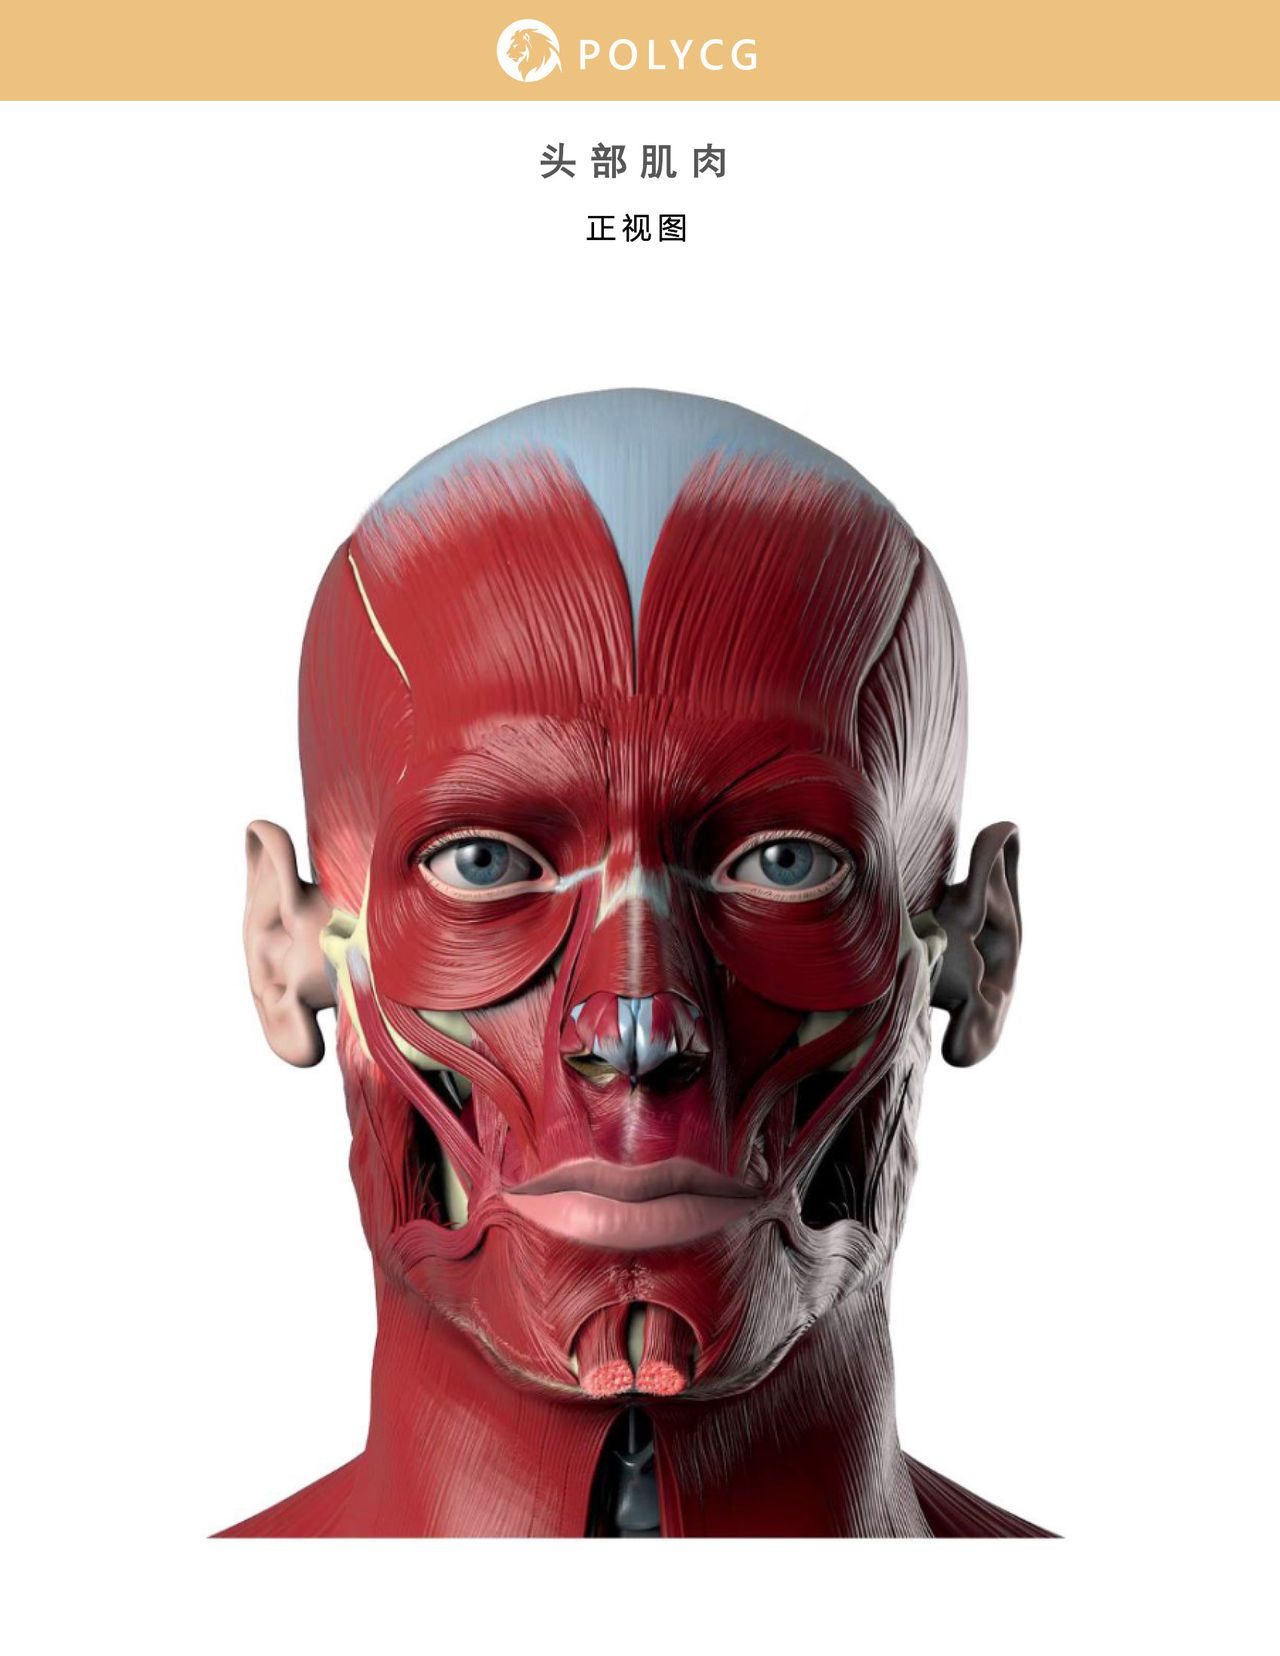 Uldis Zarins-Anatomy of Facial Expression-Exonicus [Chinese] 面部表情艺用解剖 [中文版] 38